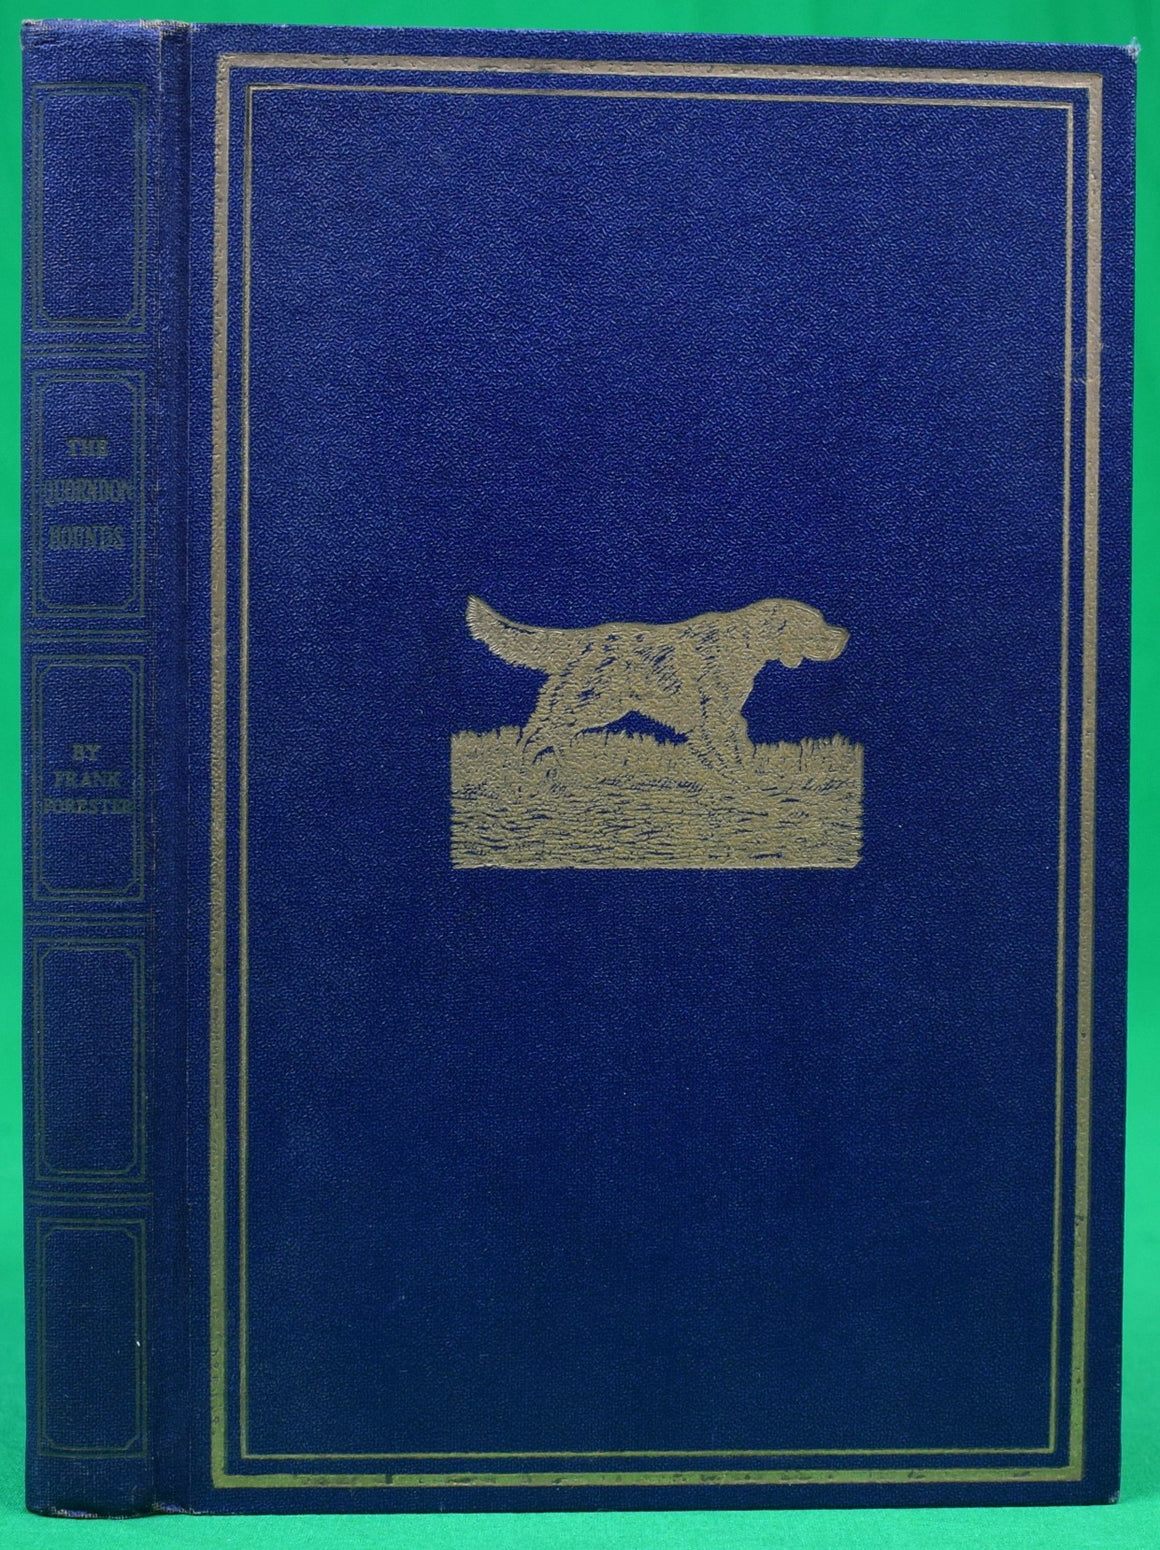 "The Quorndon Hounds Vol III" 1930 FORESTER, Frank